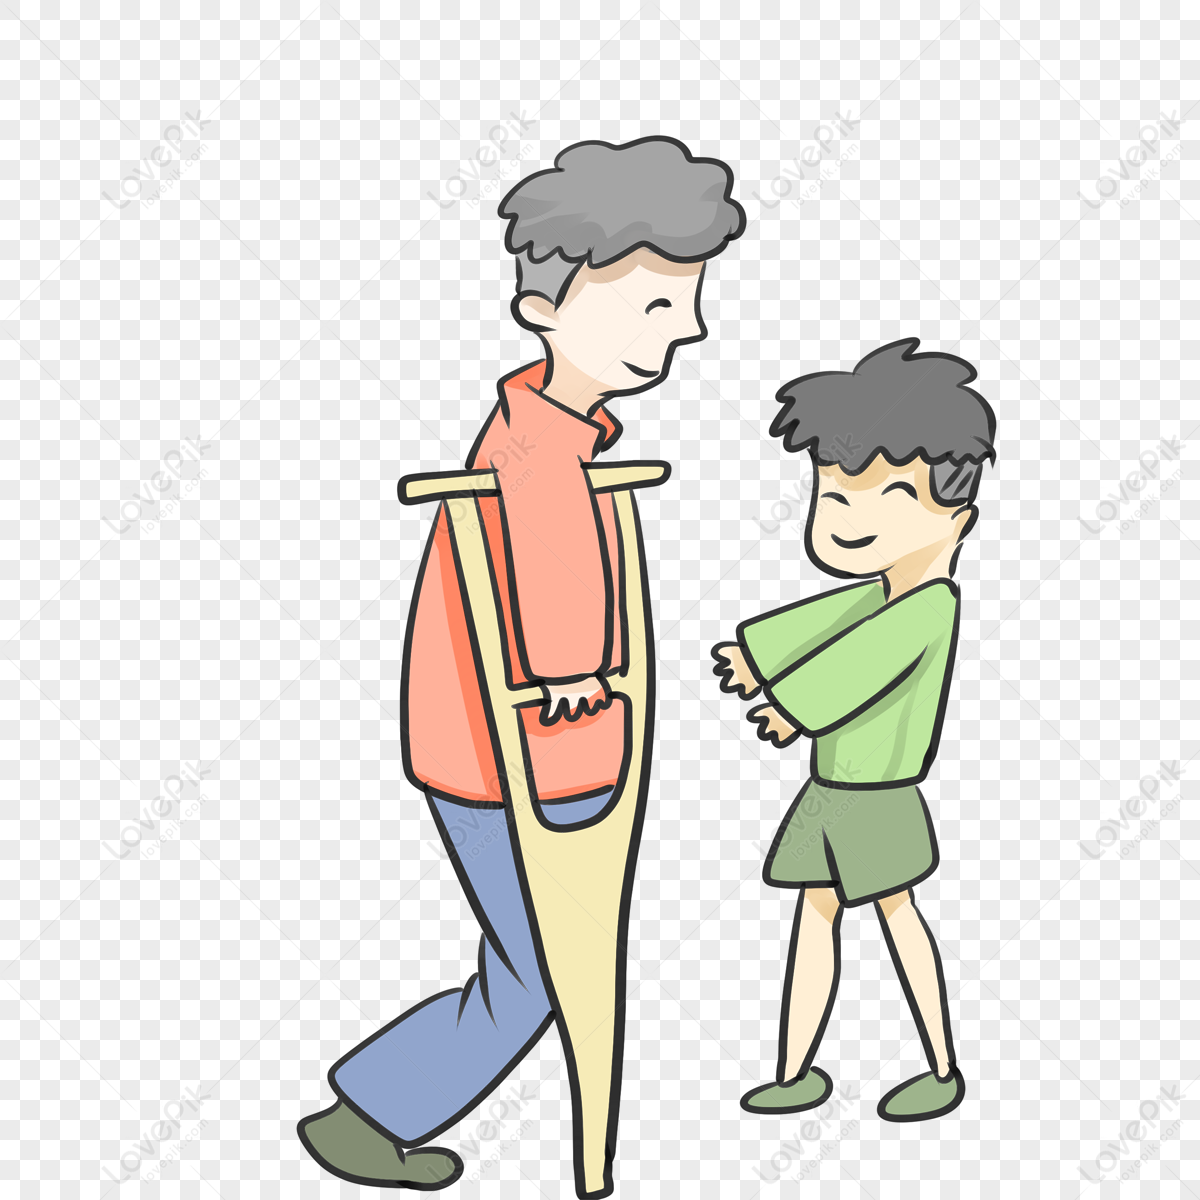 Help The Old Man Cross The Street Child PNG Image Free Download And Clipart  Image For Free Download - Lovepik | 400493411